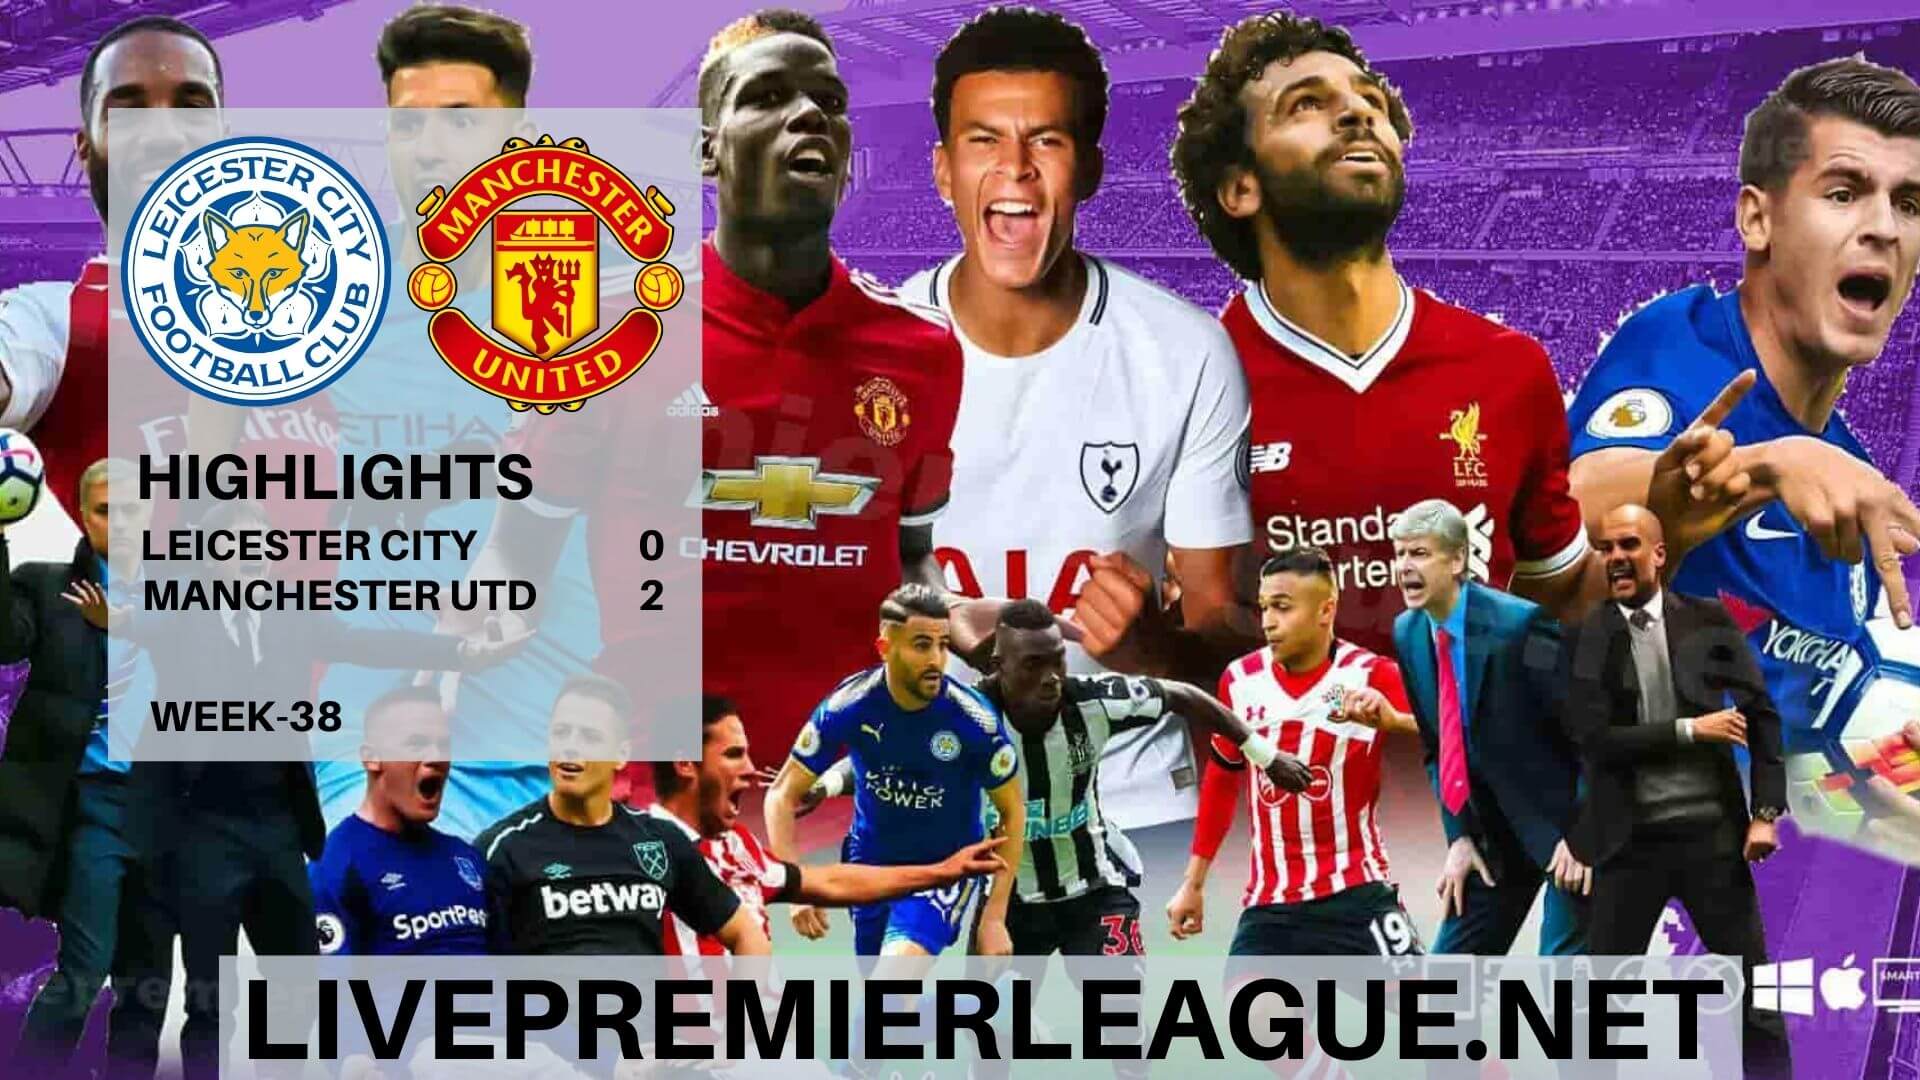 Leicester City Vs Manchester United Highlights 2020 EPL Week 38